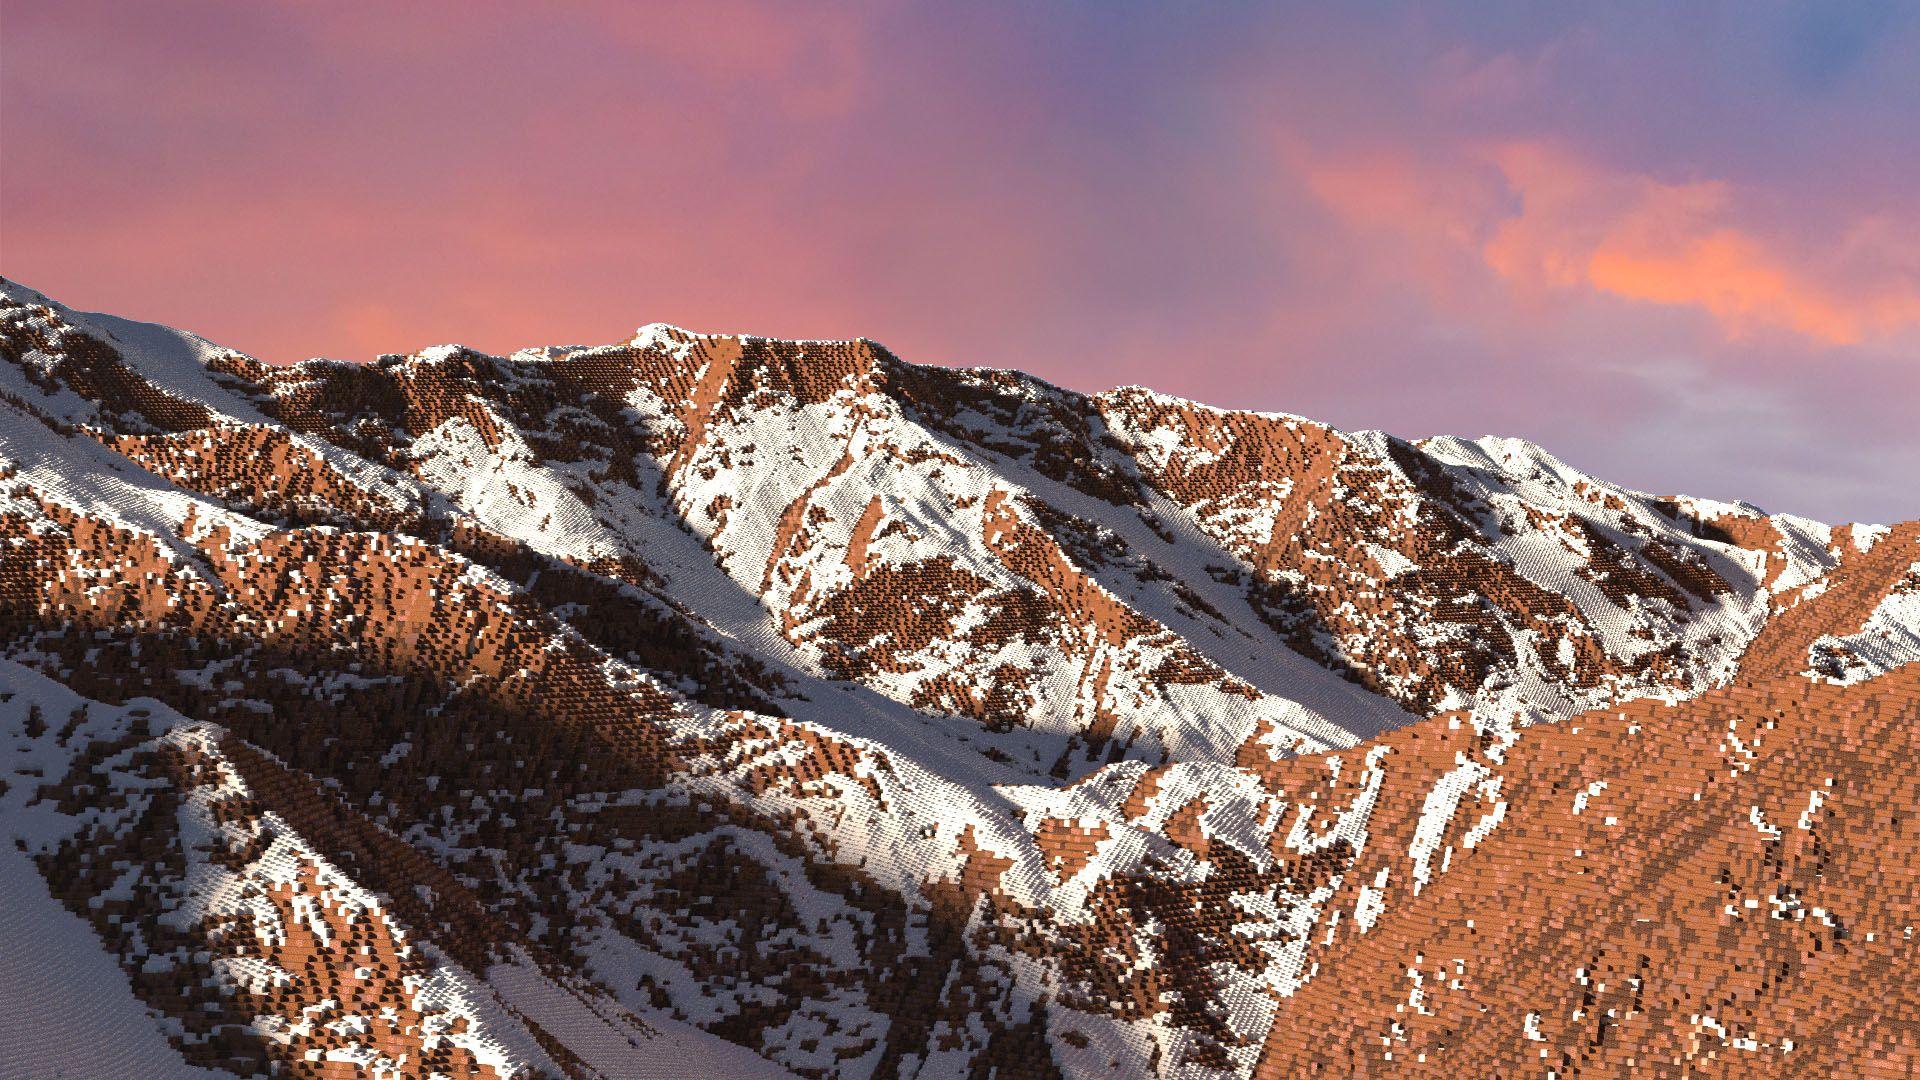 I recreated the MacOS Sierra wallpaper in Minecraft